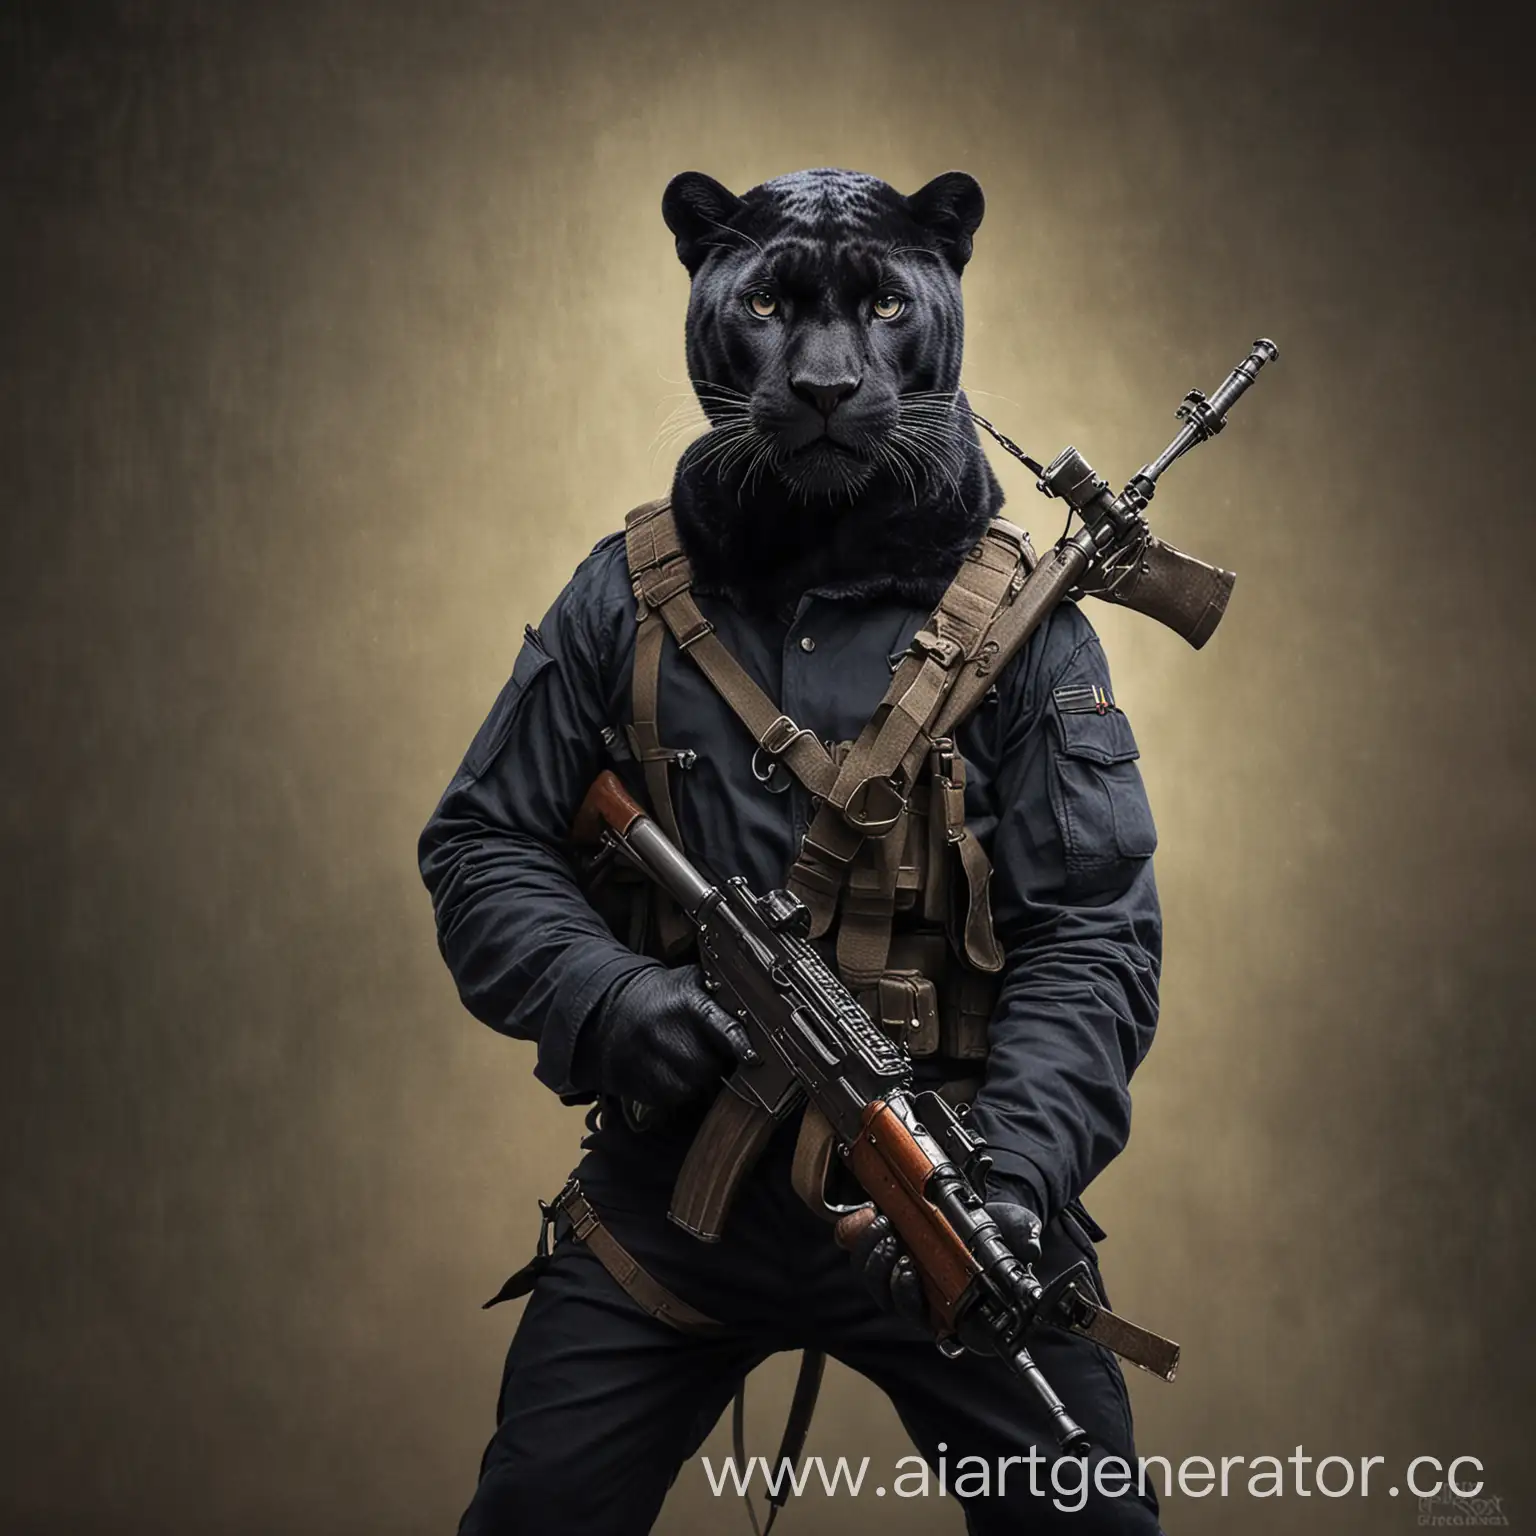 Russian-Military-Panther-with-Weapon-in-Hands